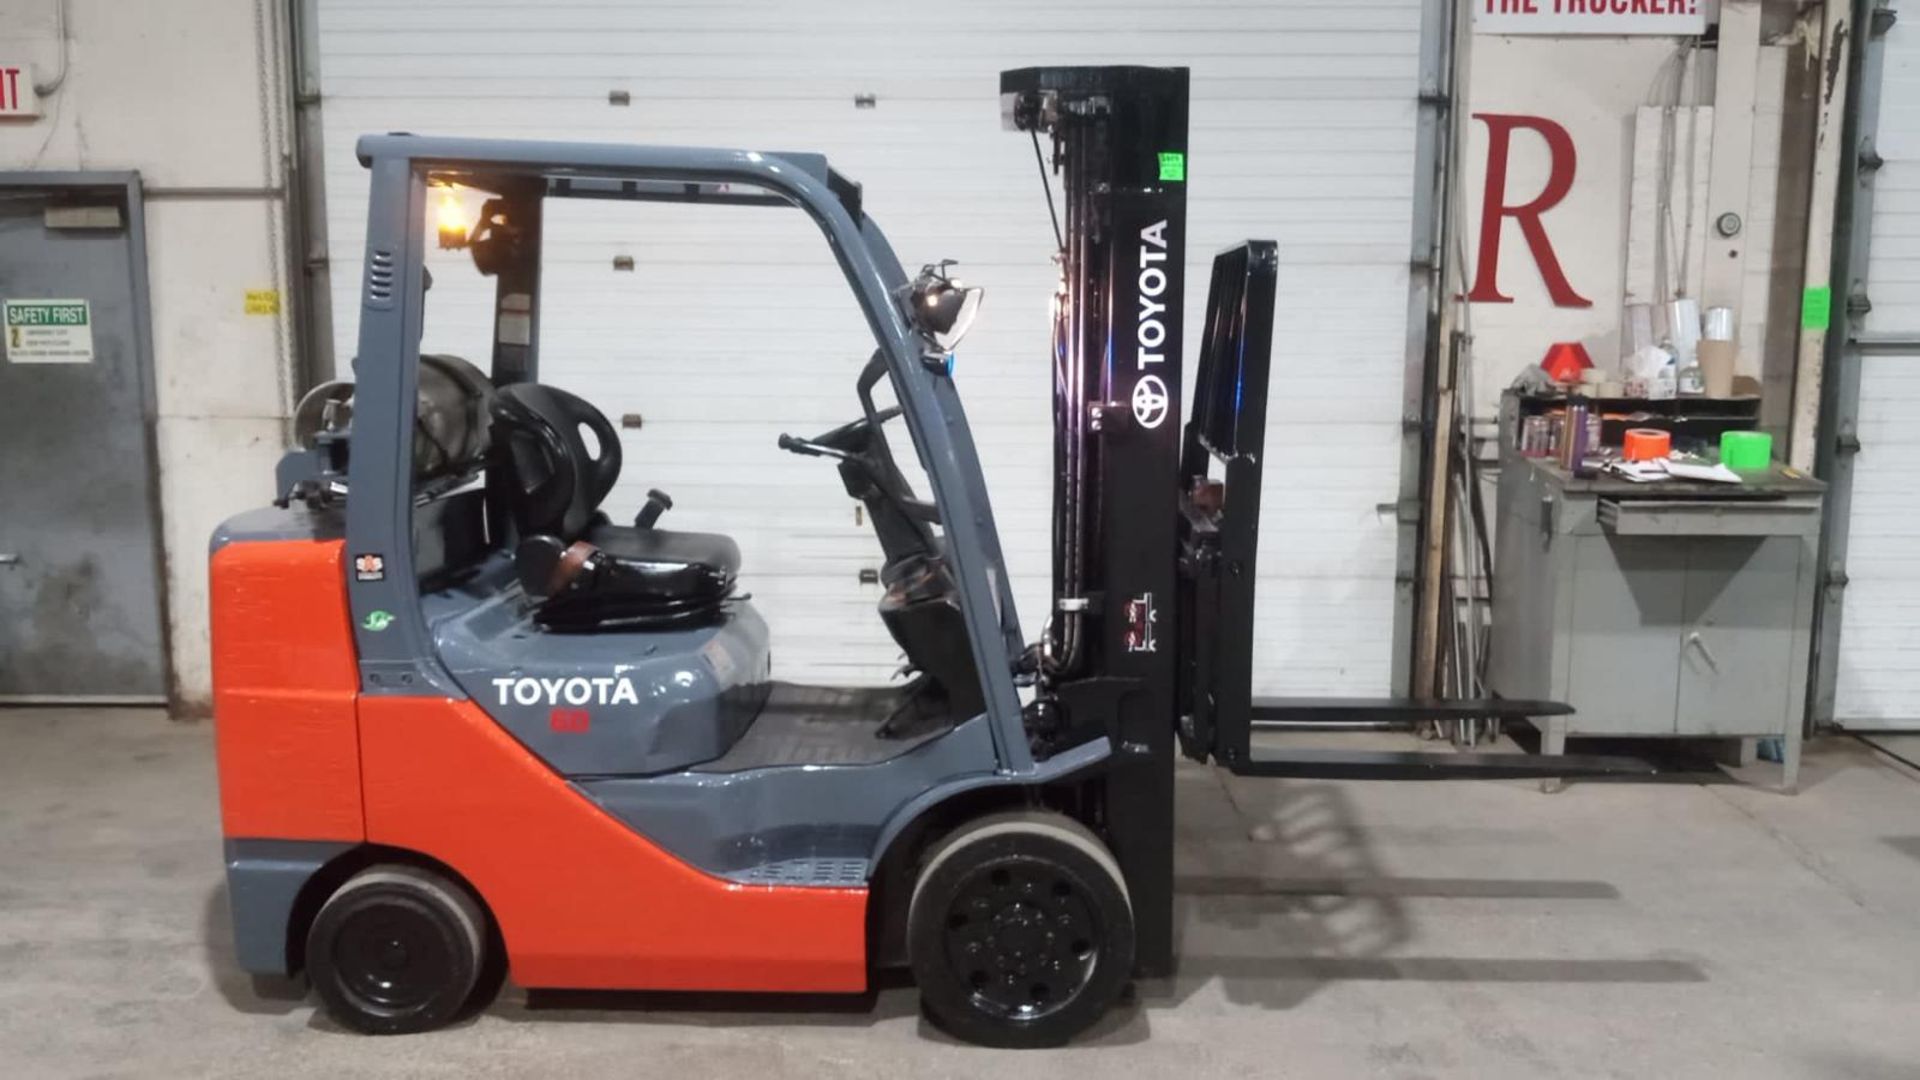 2018 TOYOTA 6,000lbs Capacity LPG (Propane) Forklift indoor with sideshift and 3-STAGE MAST